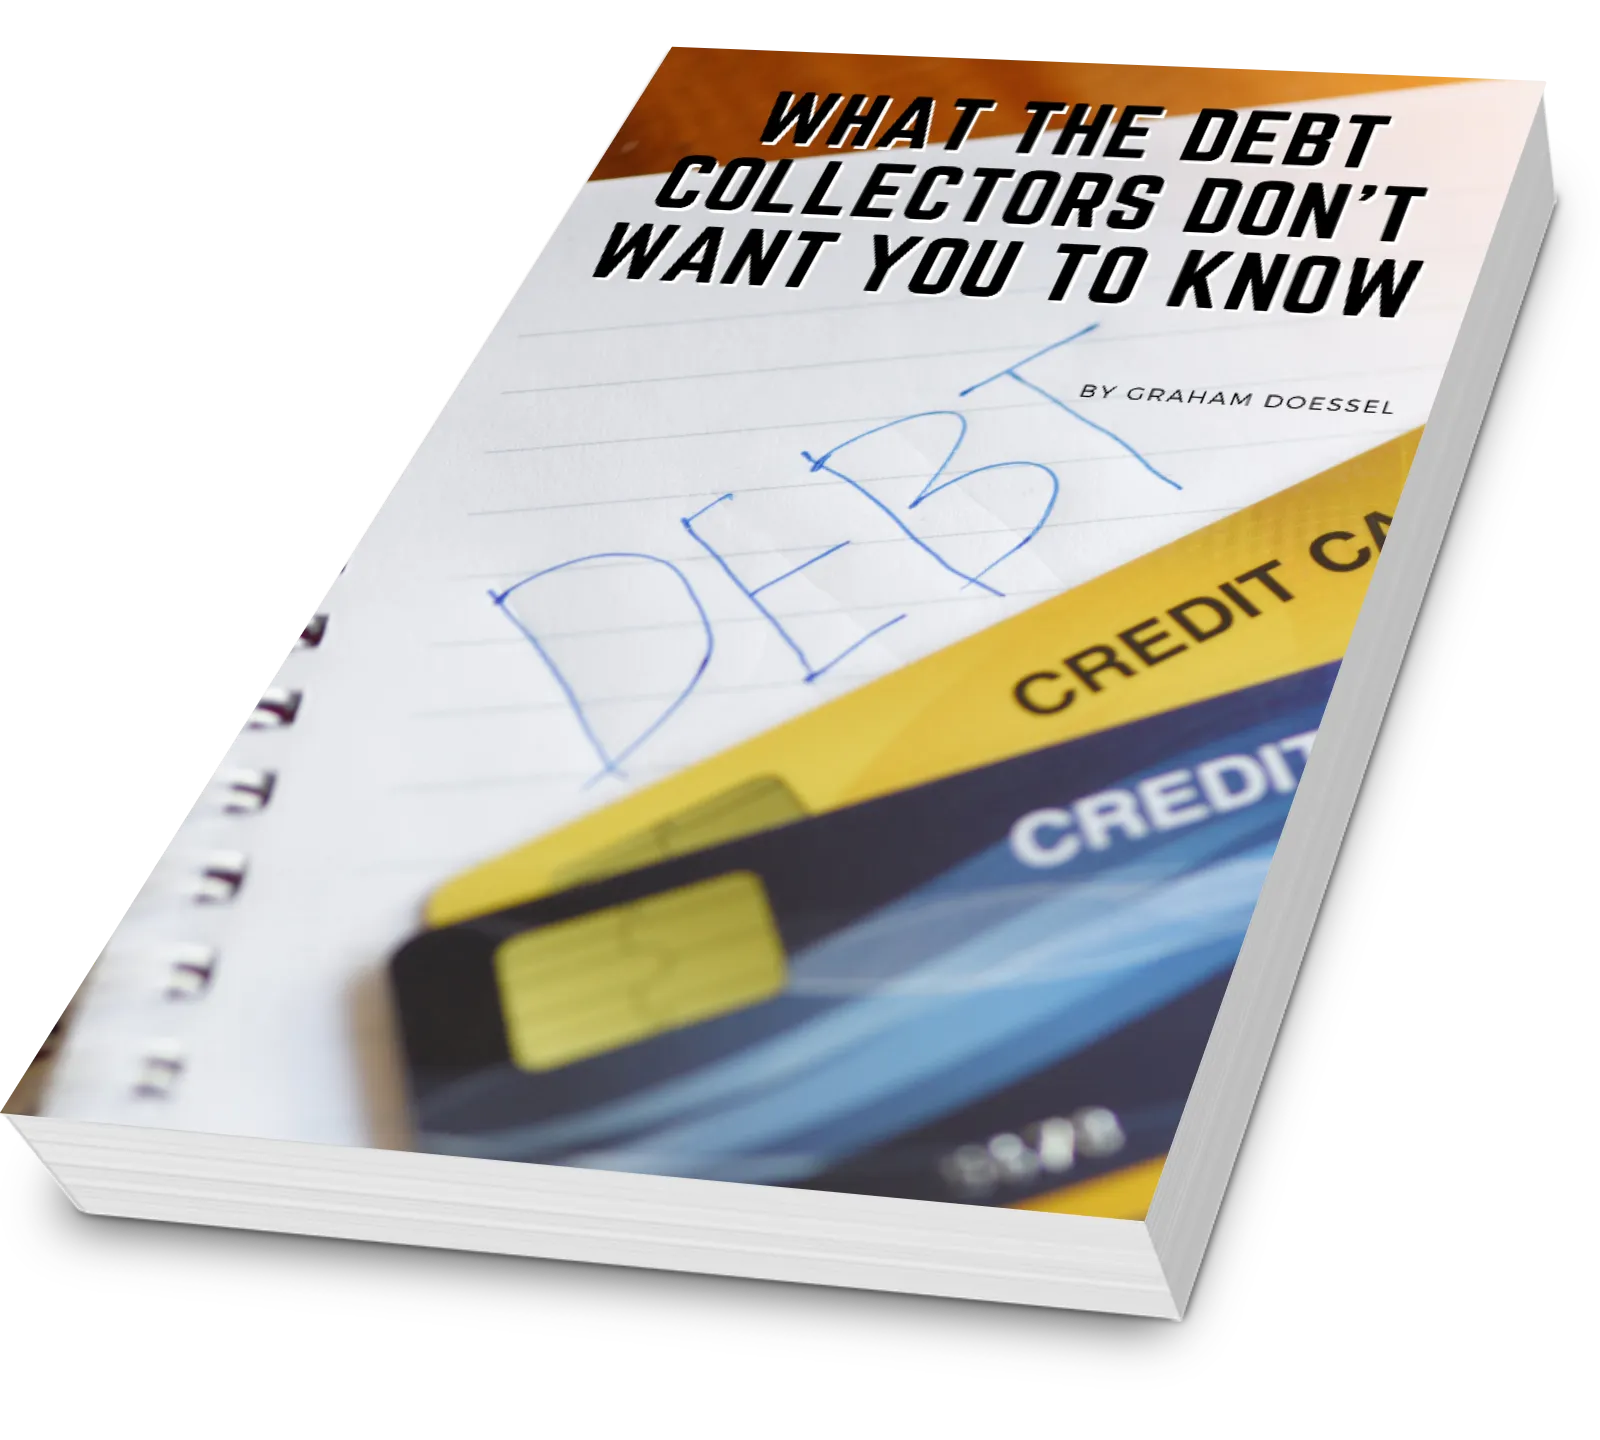 What The Debt Collectors Don't Want You To Know